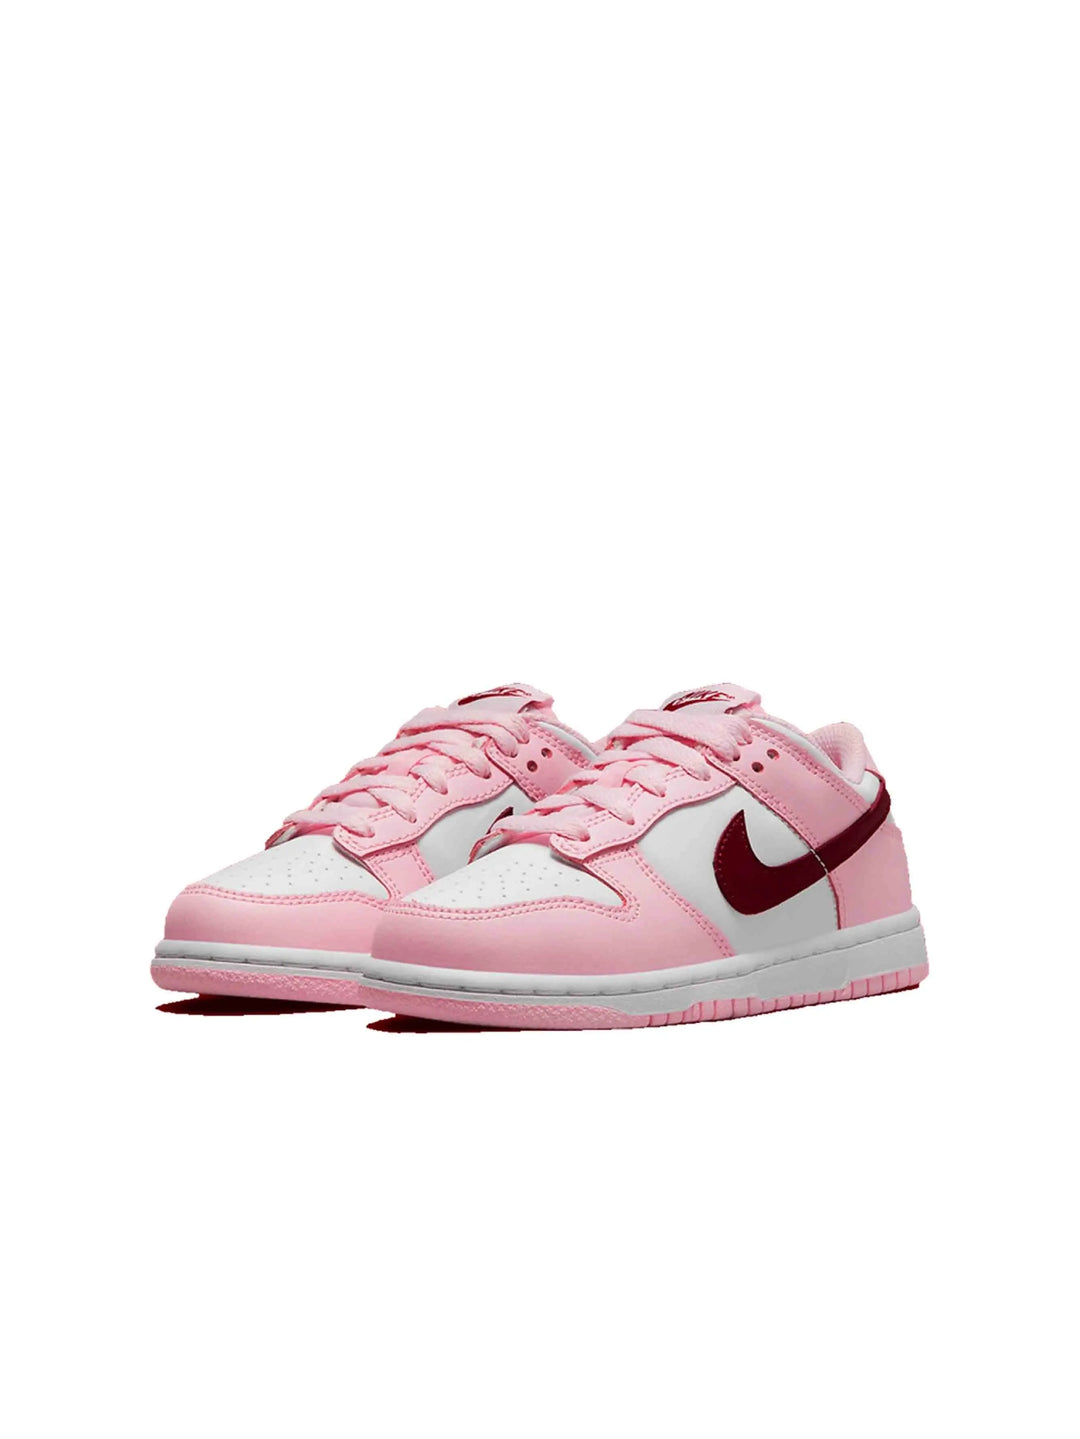 Nike Dunk Low Pink Red White (PS) Prior